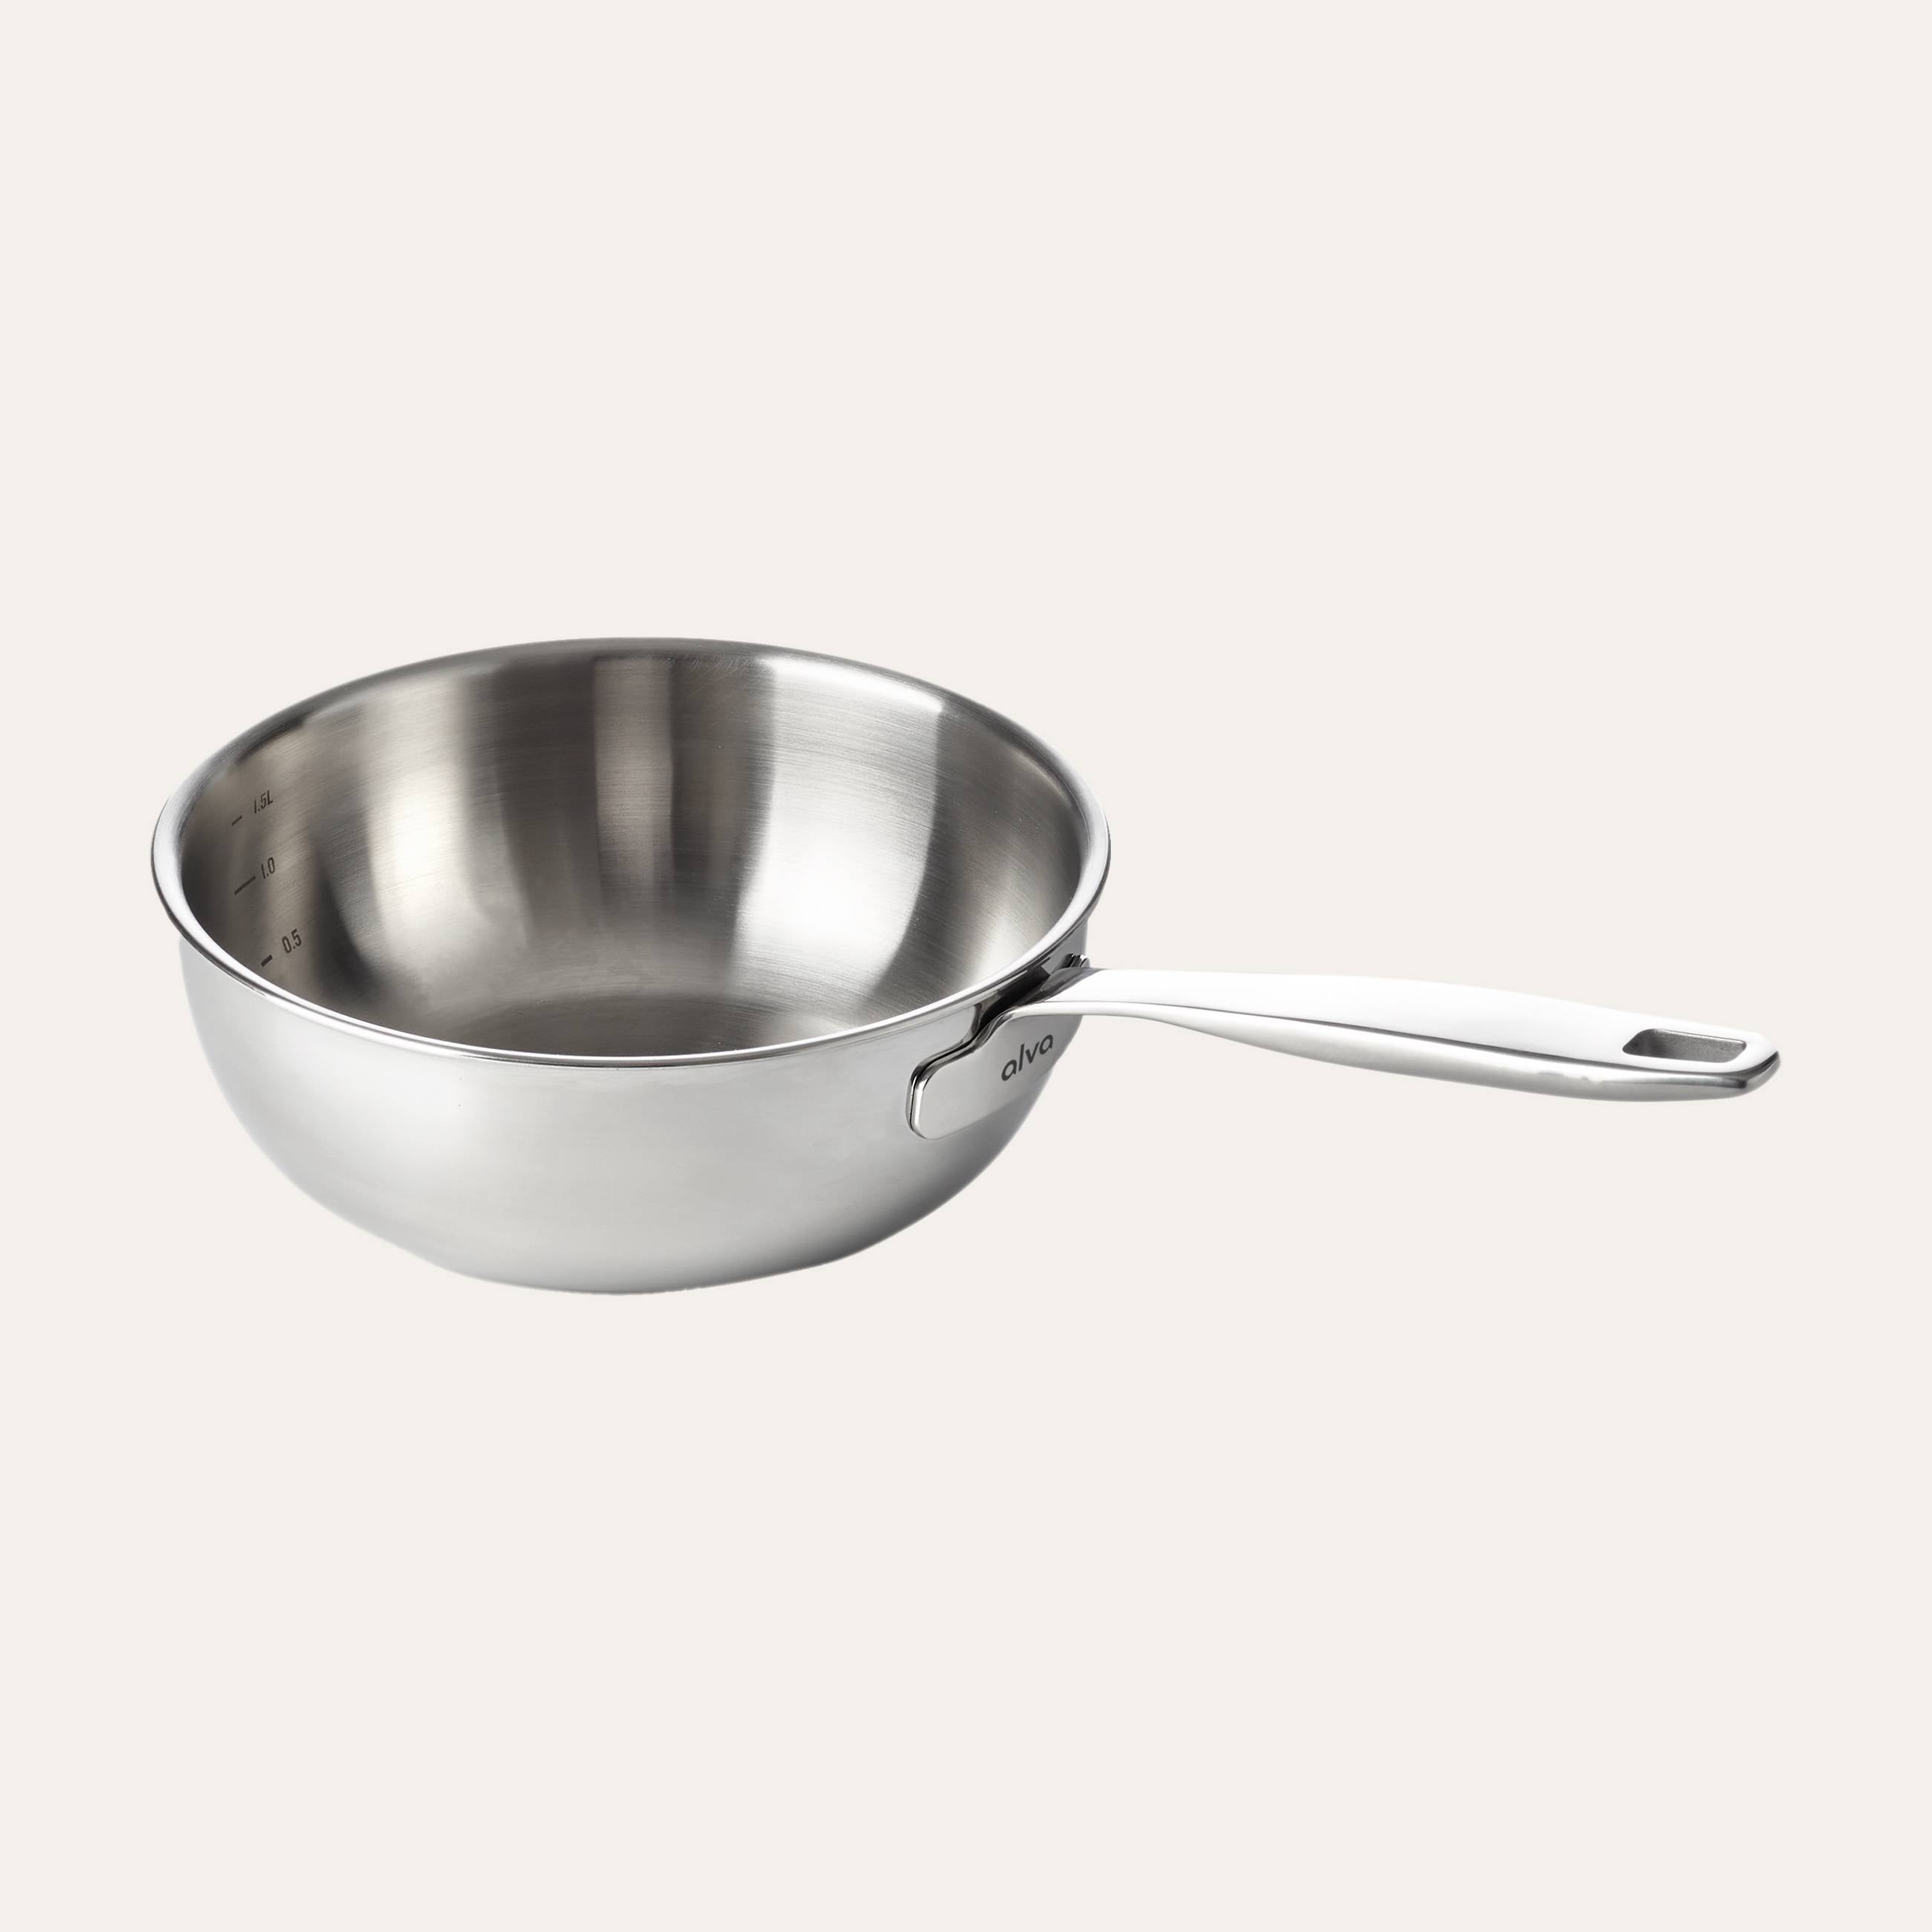 Alva 2.1 qt. Stainless Steel with Lid 100517